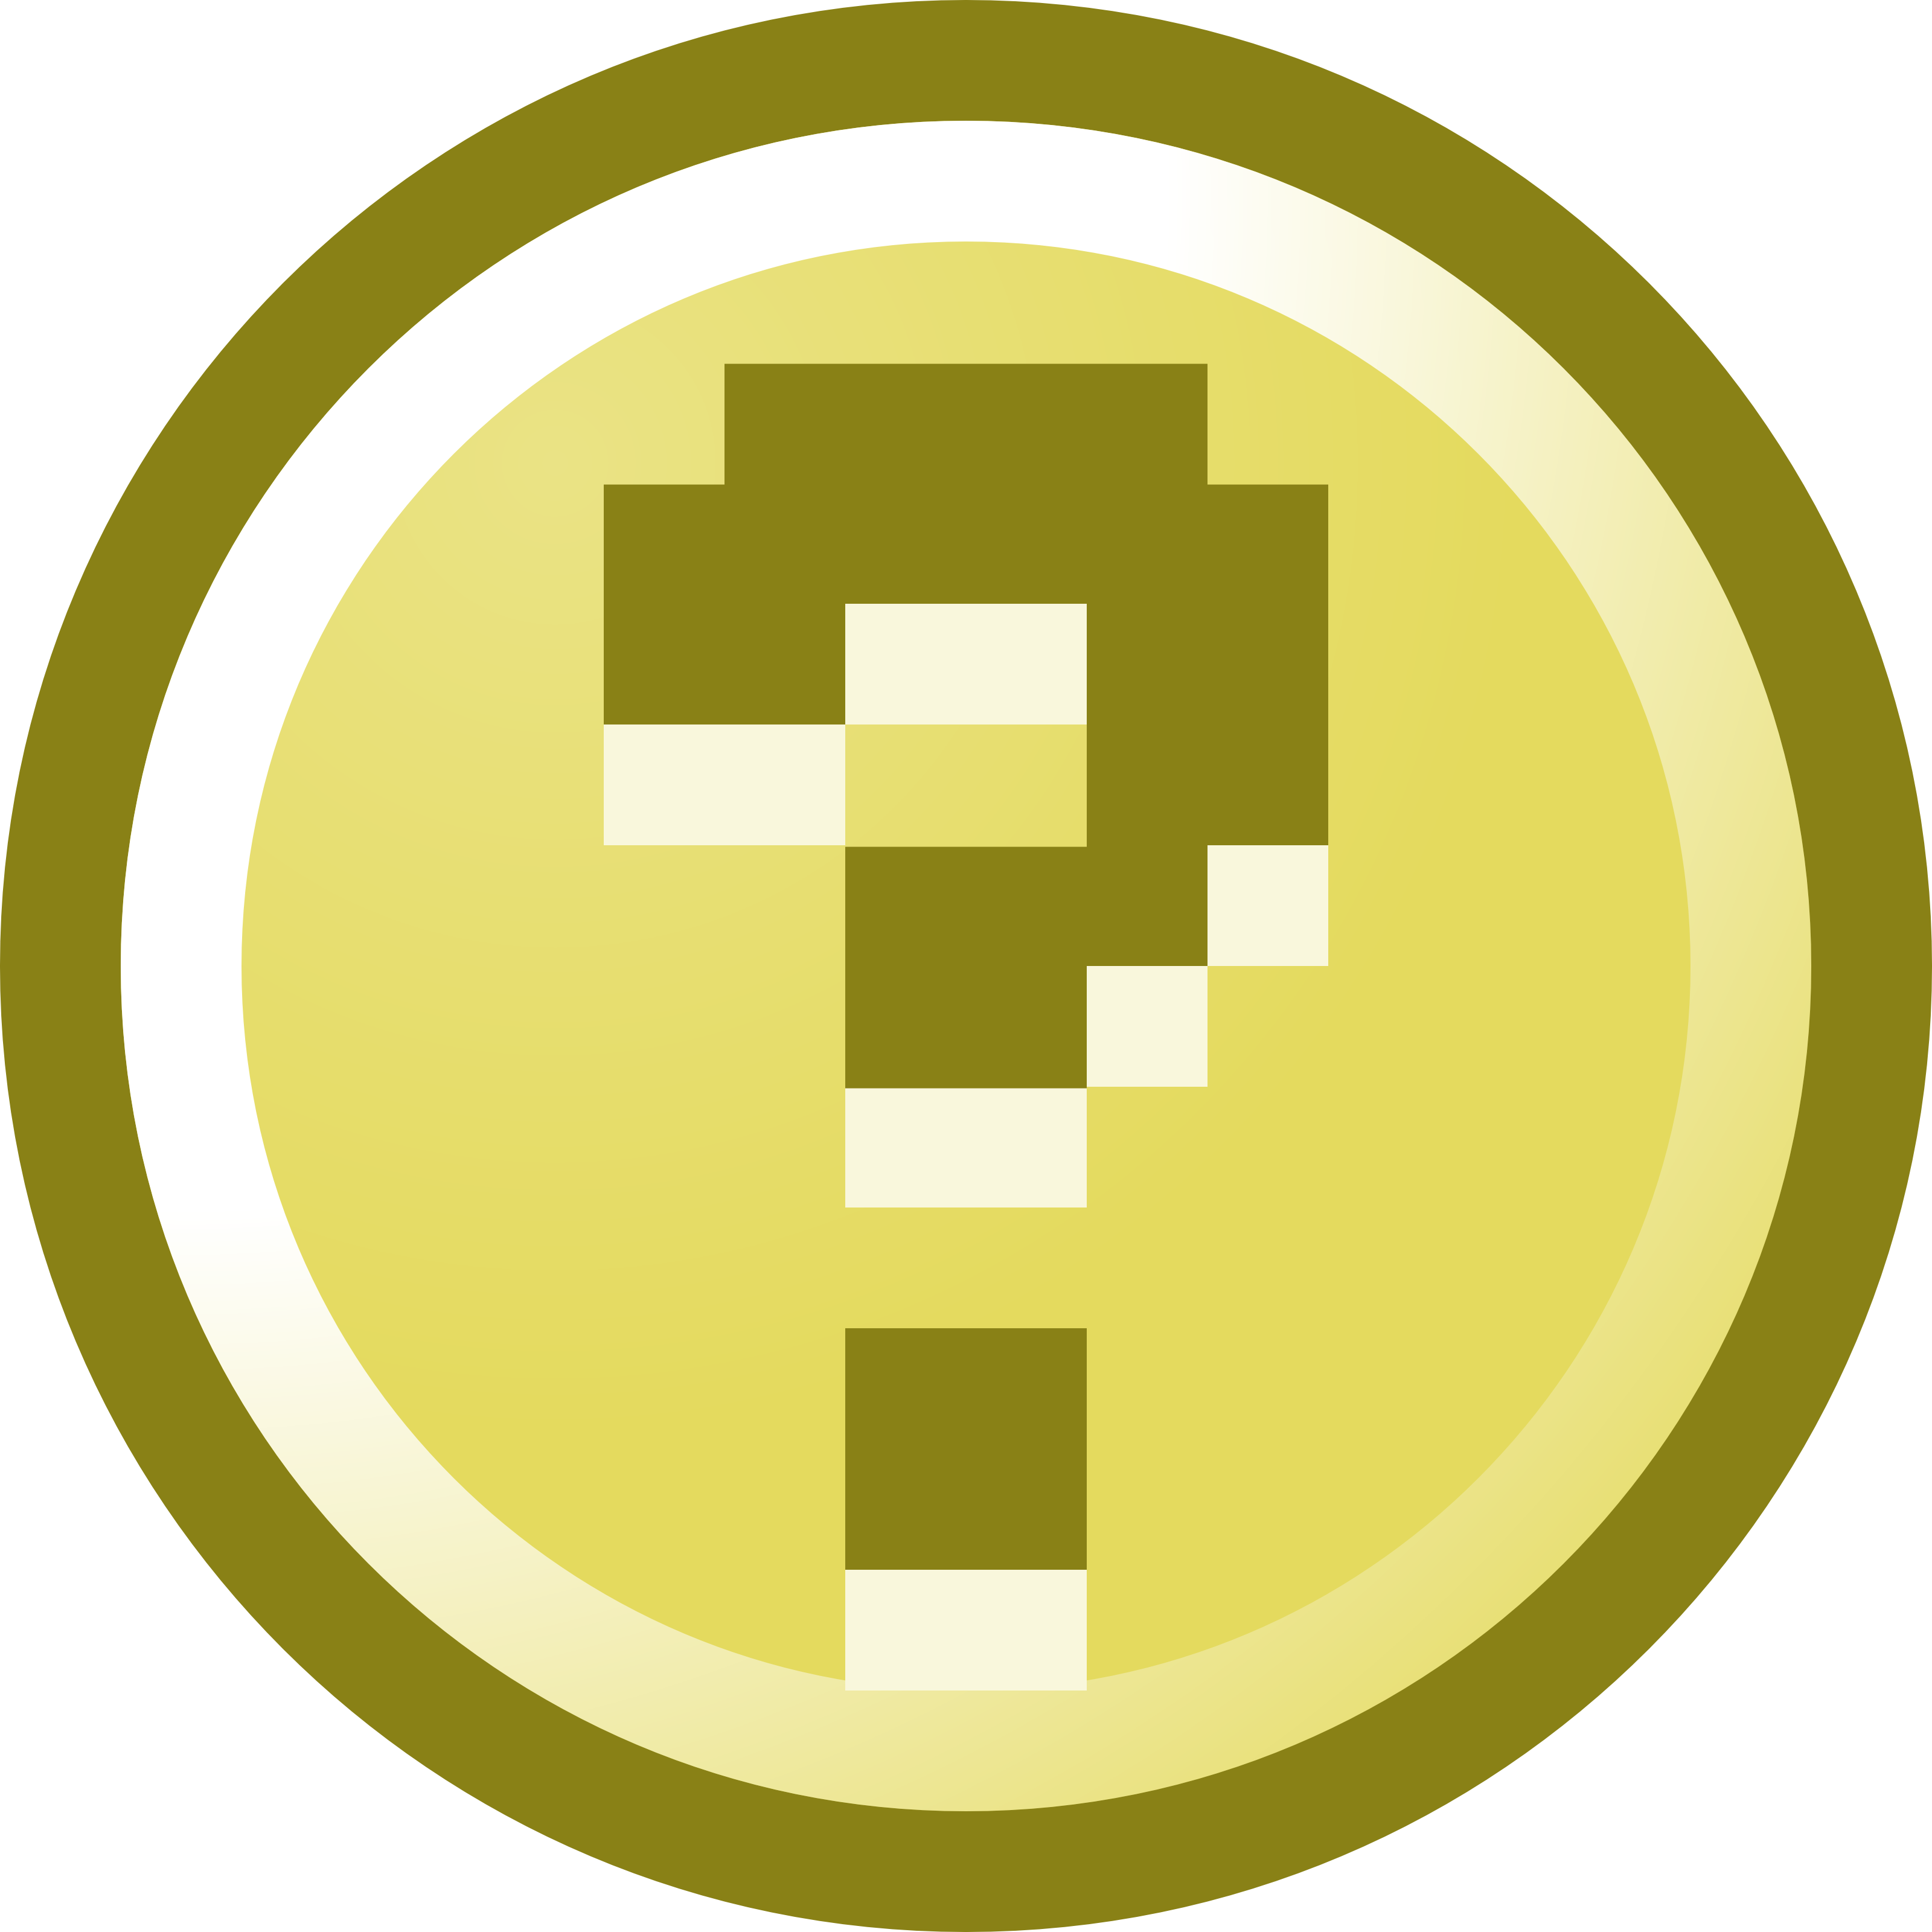 Image - 12-Free-Vector-Illustration-Of-A-Question-Mark-Icon.png ...